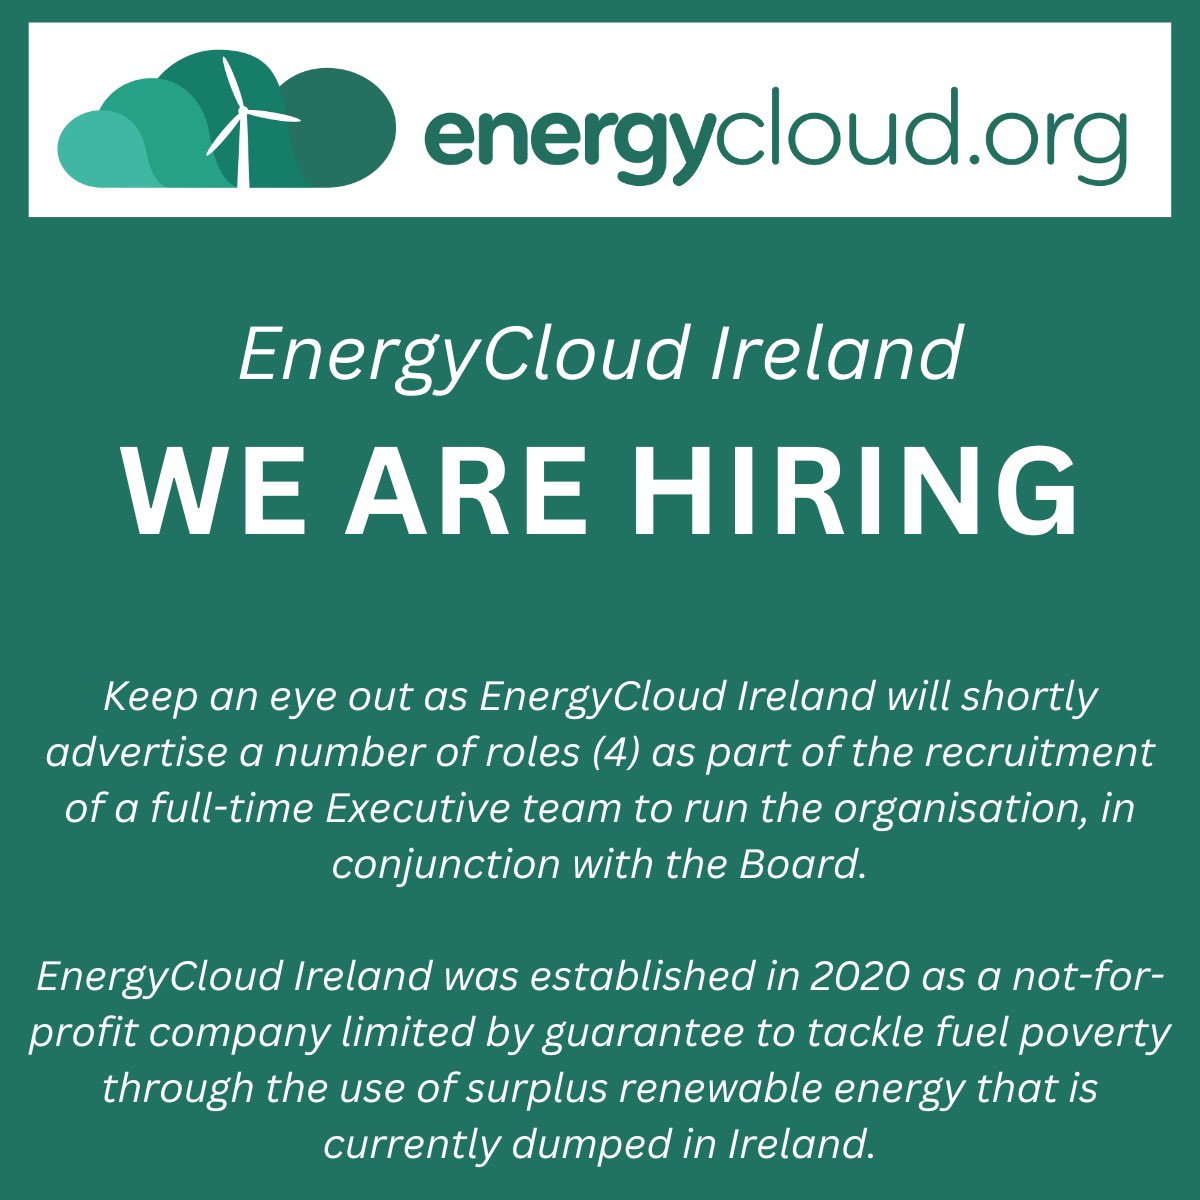 🌟 EnergyCloud Ireland - WE ARE HIRING 🌟 We are thrilled to announce the commencement of recruitment to build an executive team for EnergyCloud Ireland! @jpemul06 @dave_linehan @mrniallcarson @cathallee @ThatsMyThinking @SineadMDuffy70 @NoelCunniffeIE @chrismmgordon